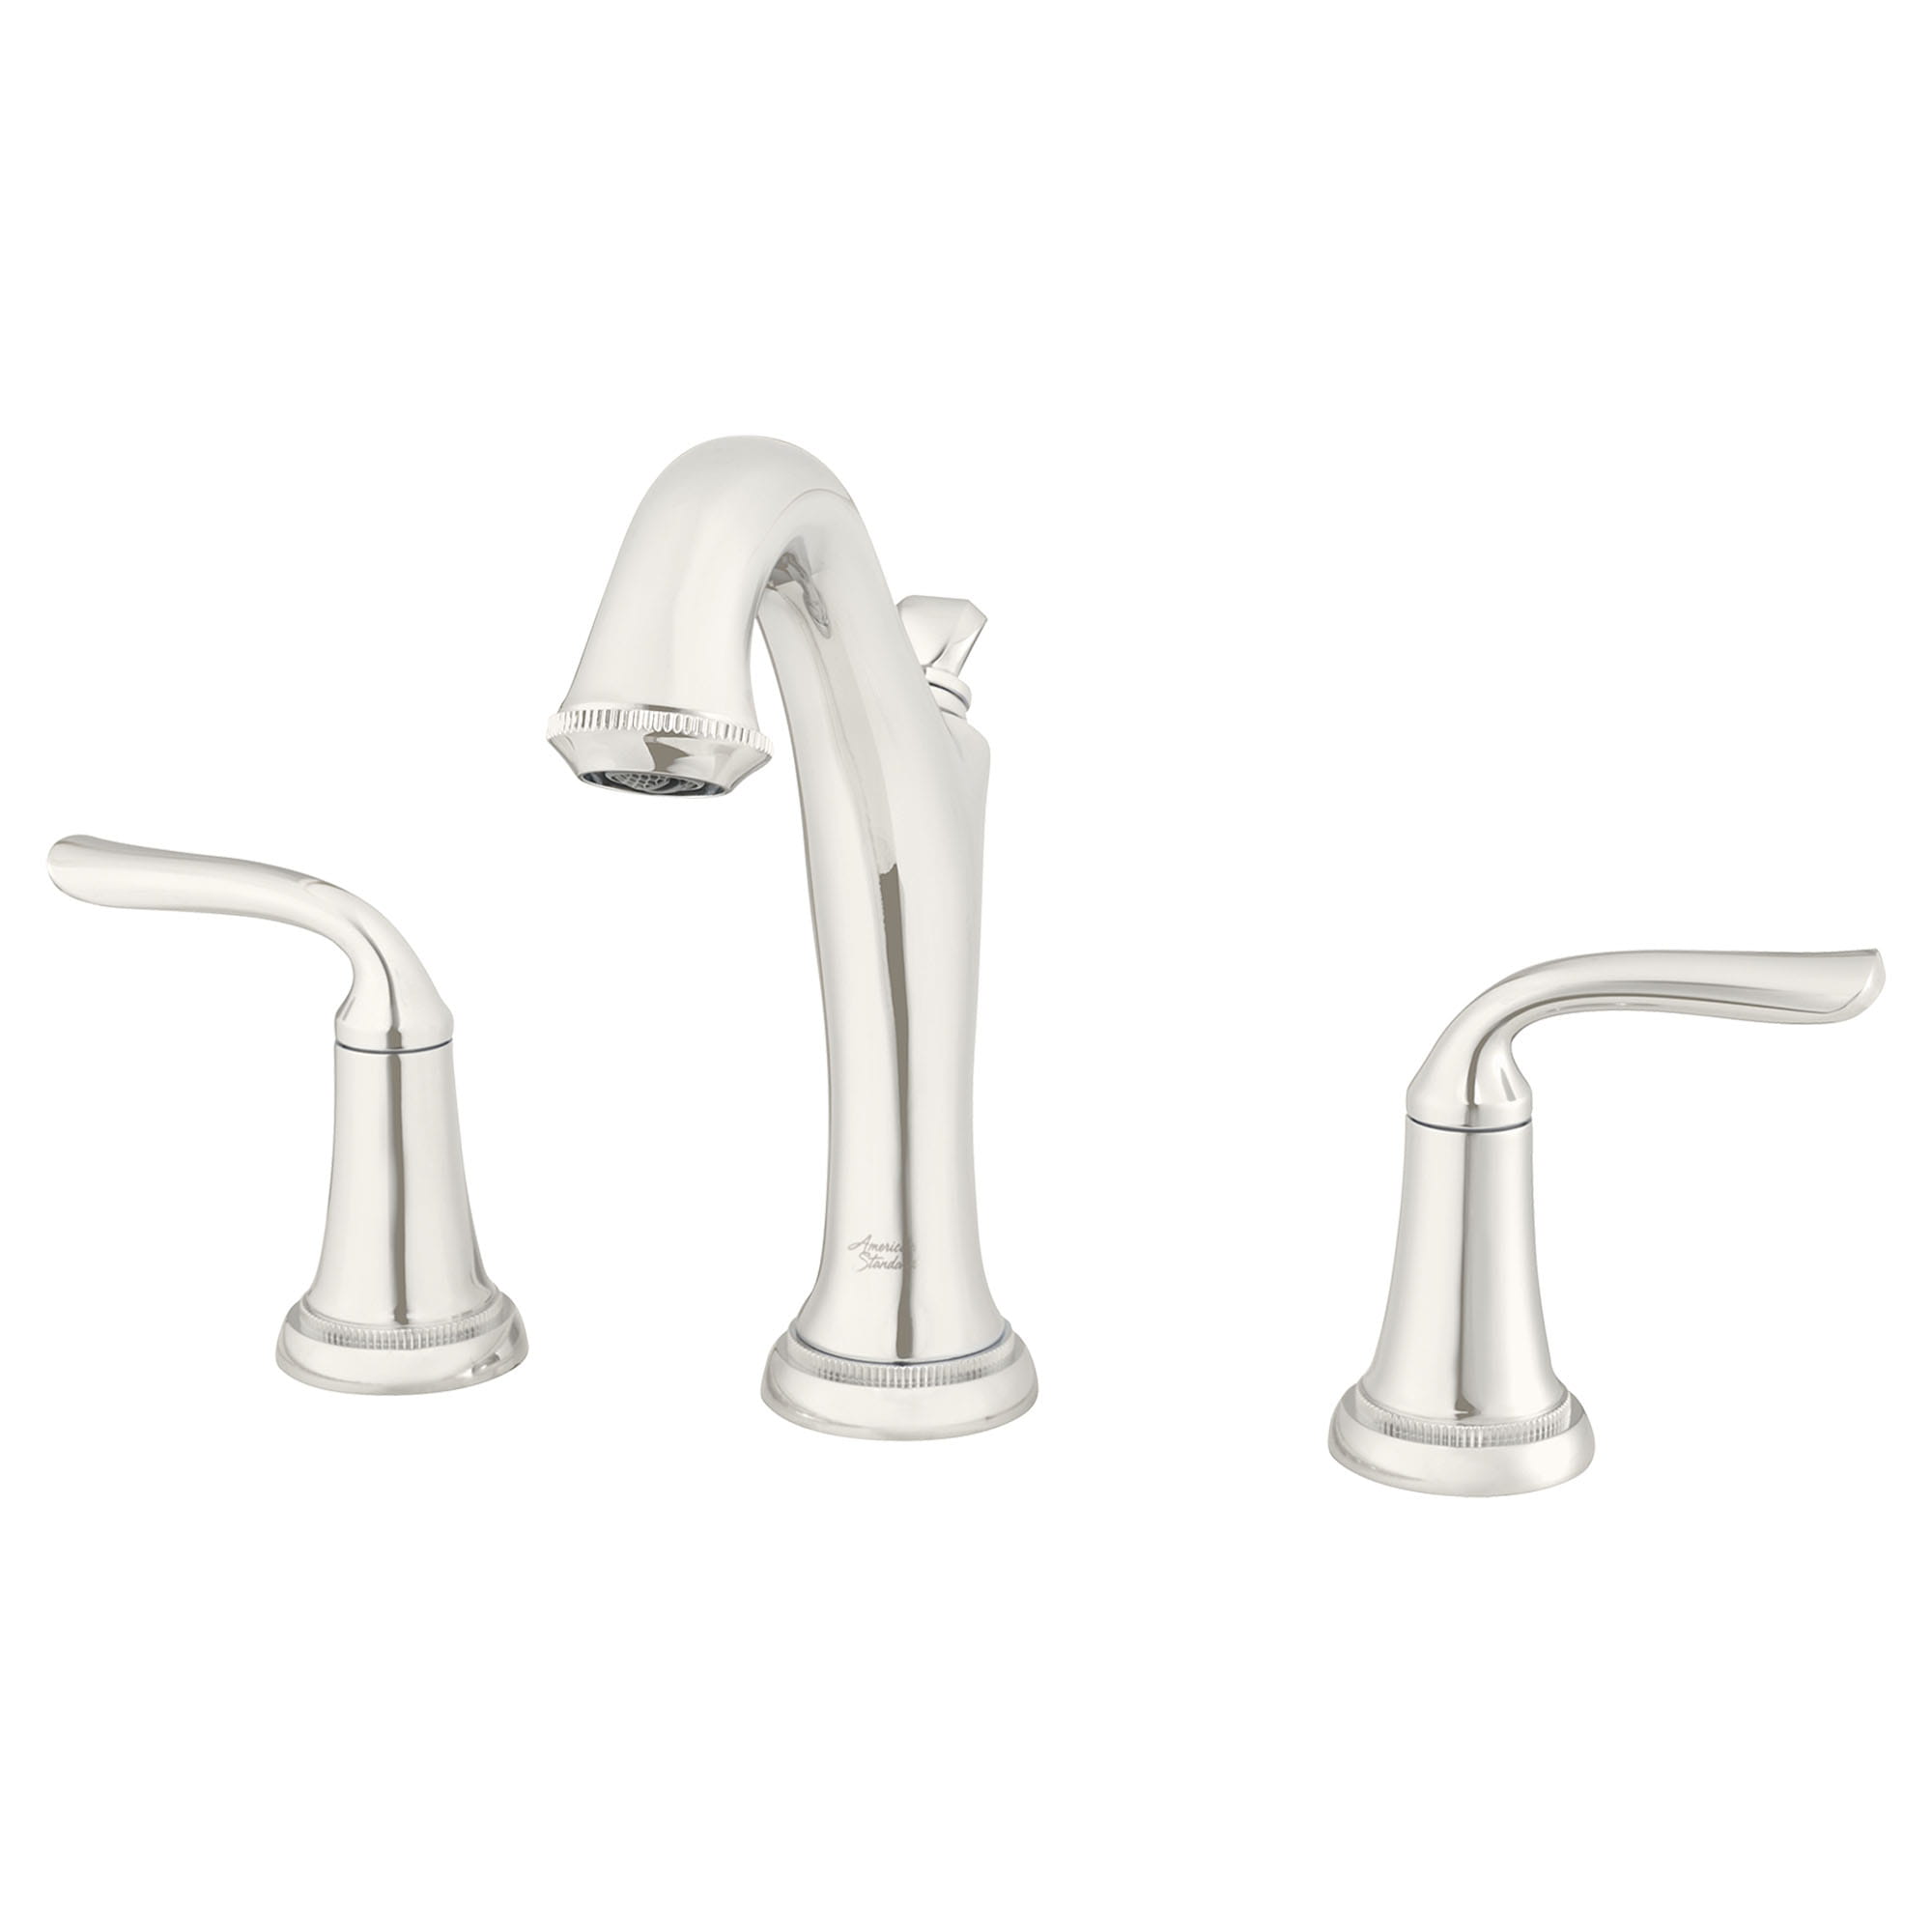 Patience® 8-Inch Widespread 2-Handle Bathroom Faucet 1.2 gpm/4.5 L/min With Lever Handles